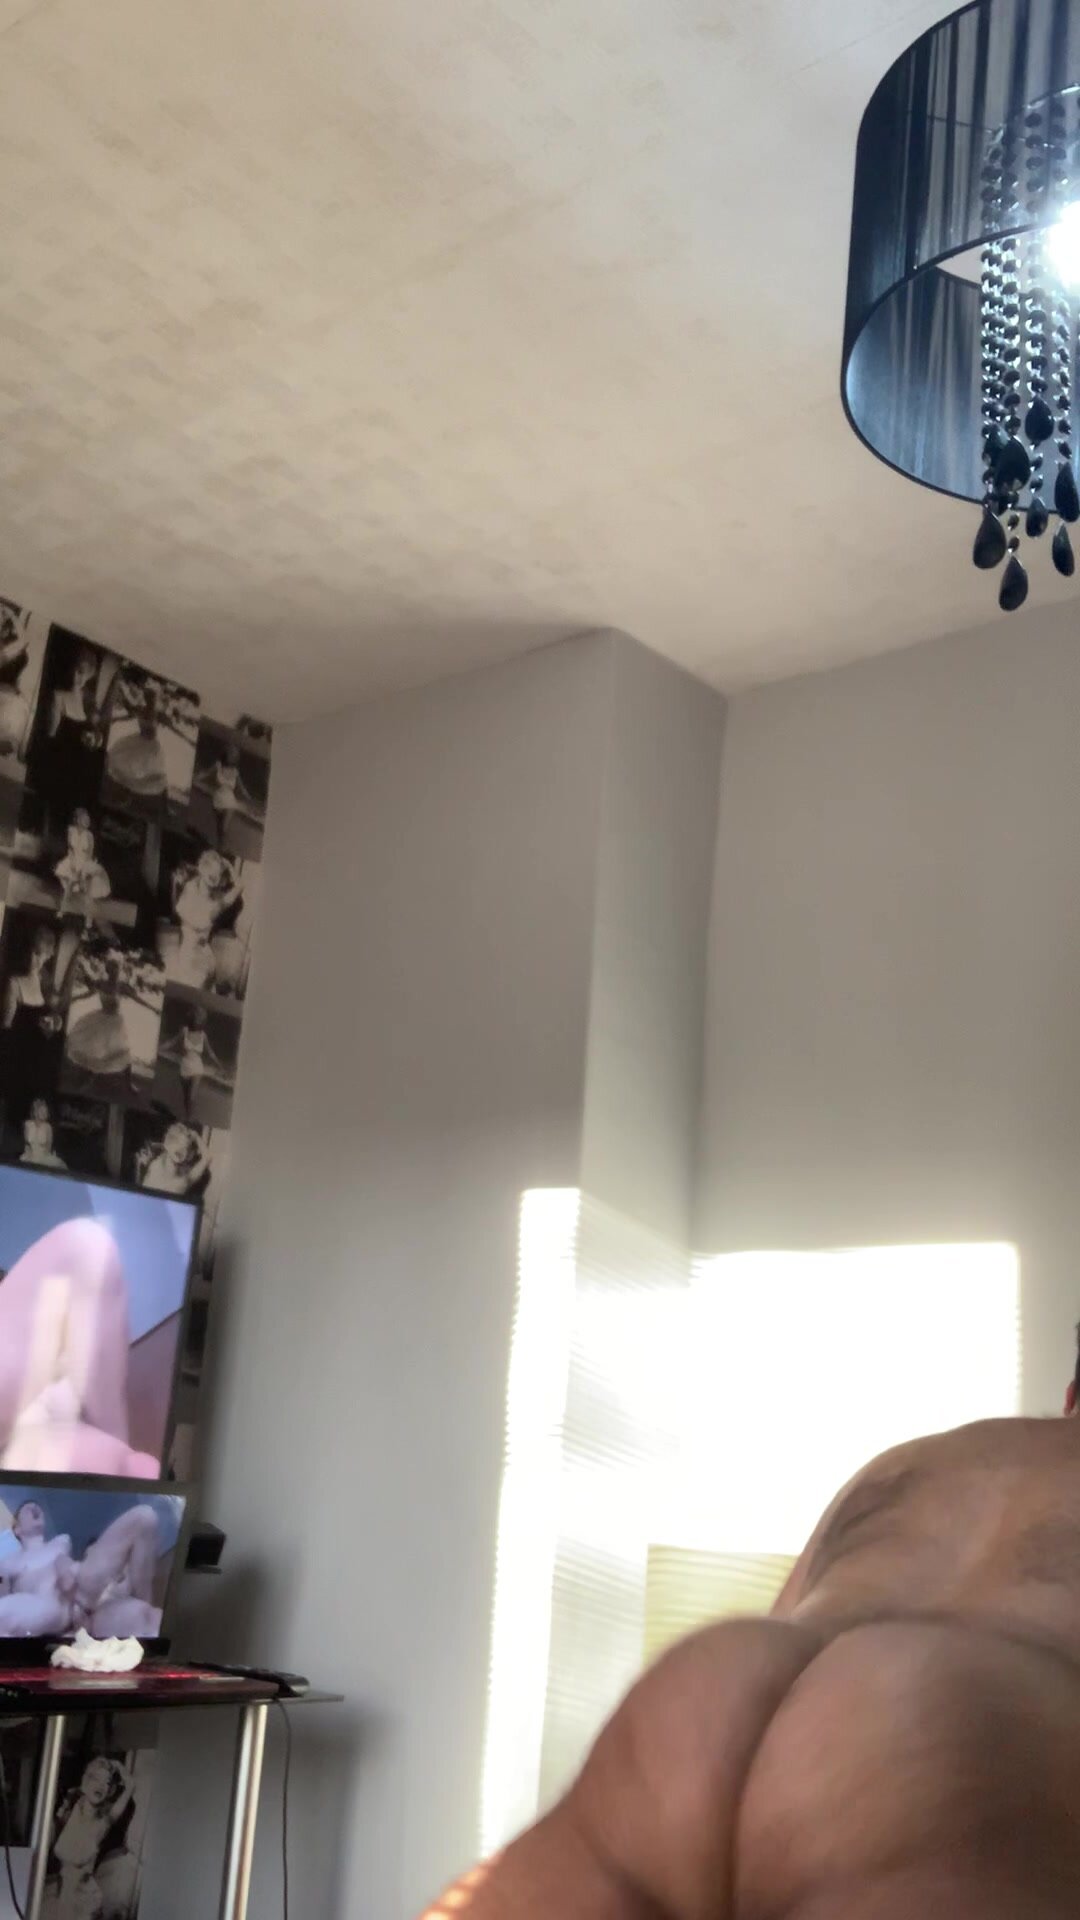 Me getting fucked hard - video 2